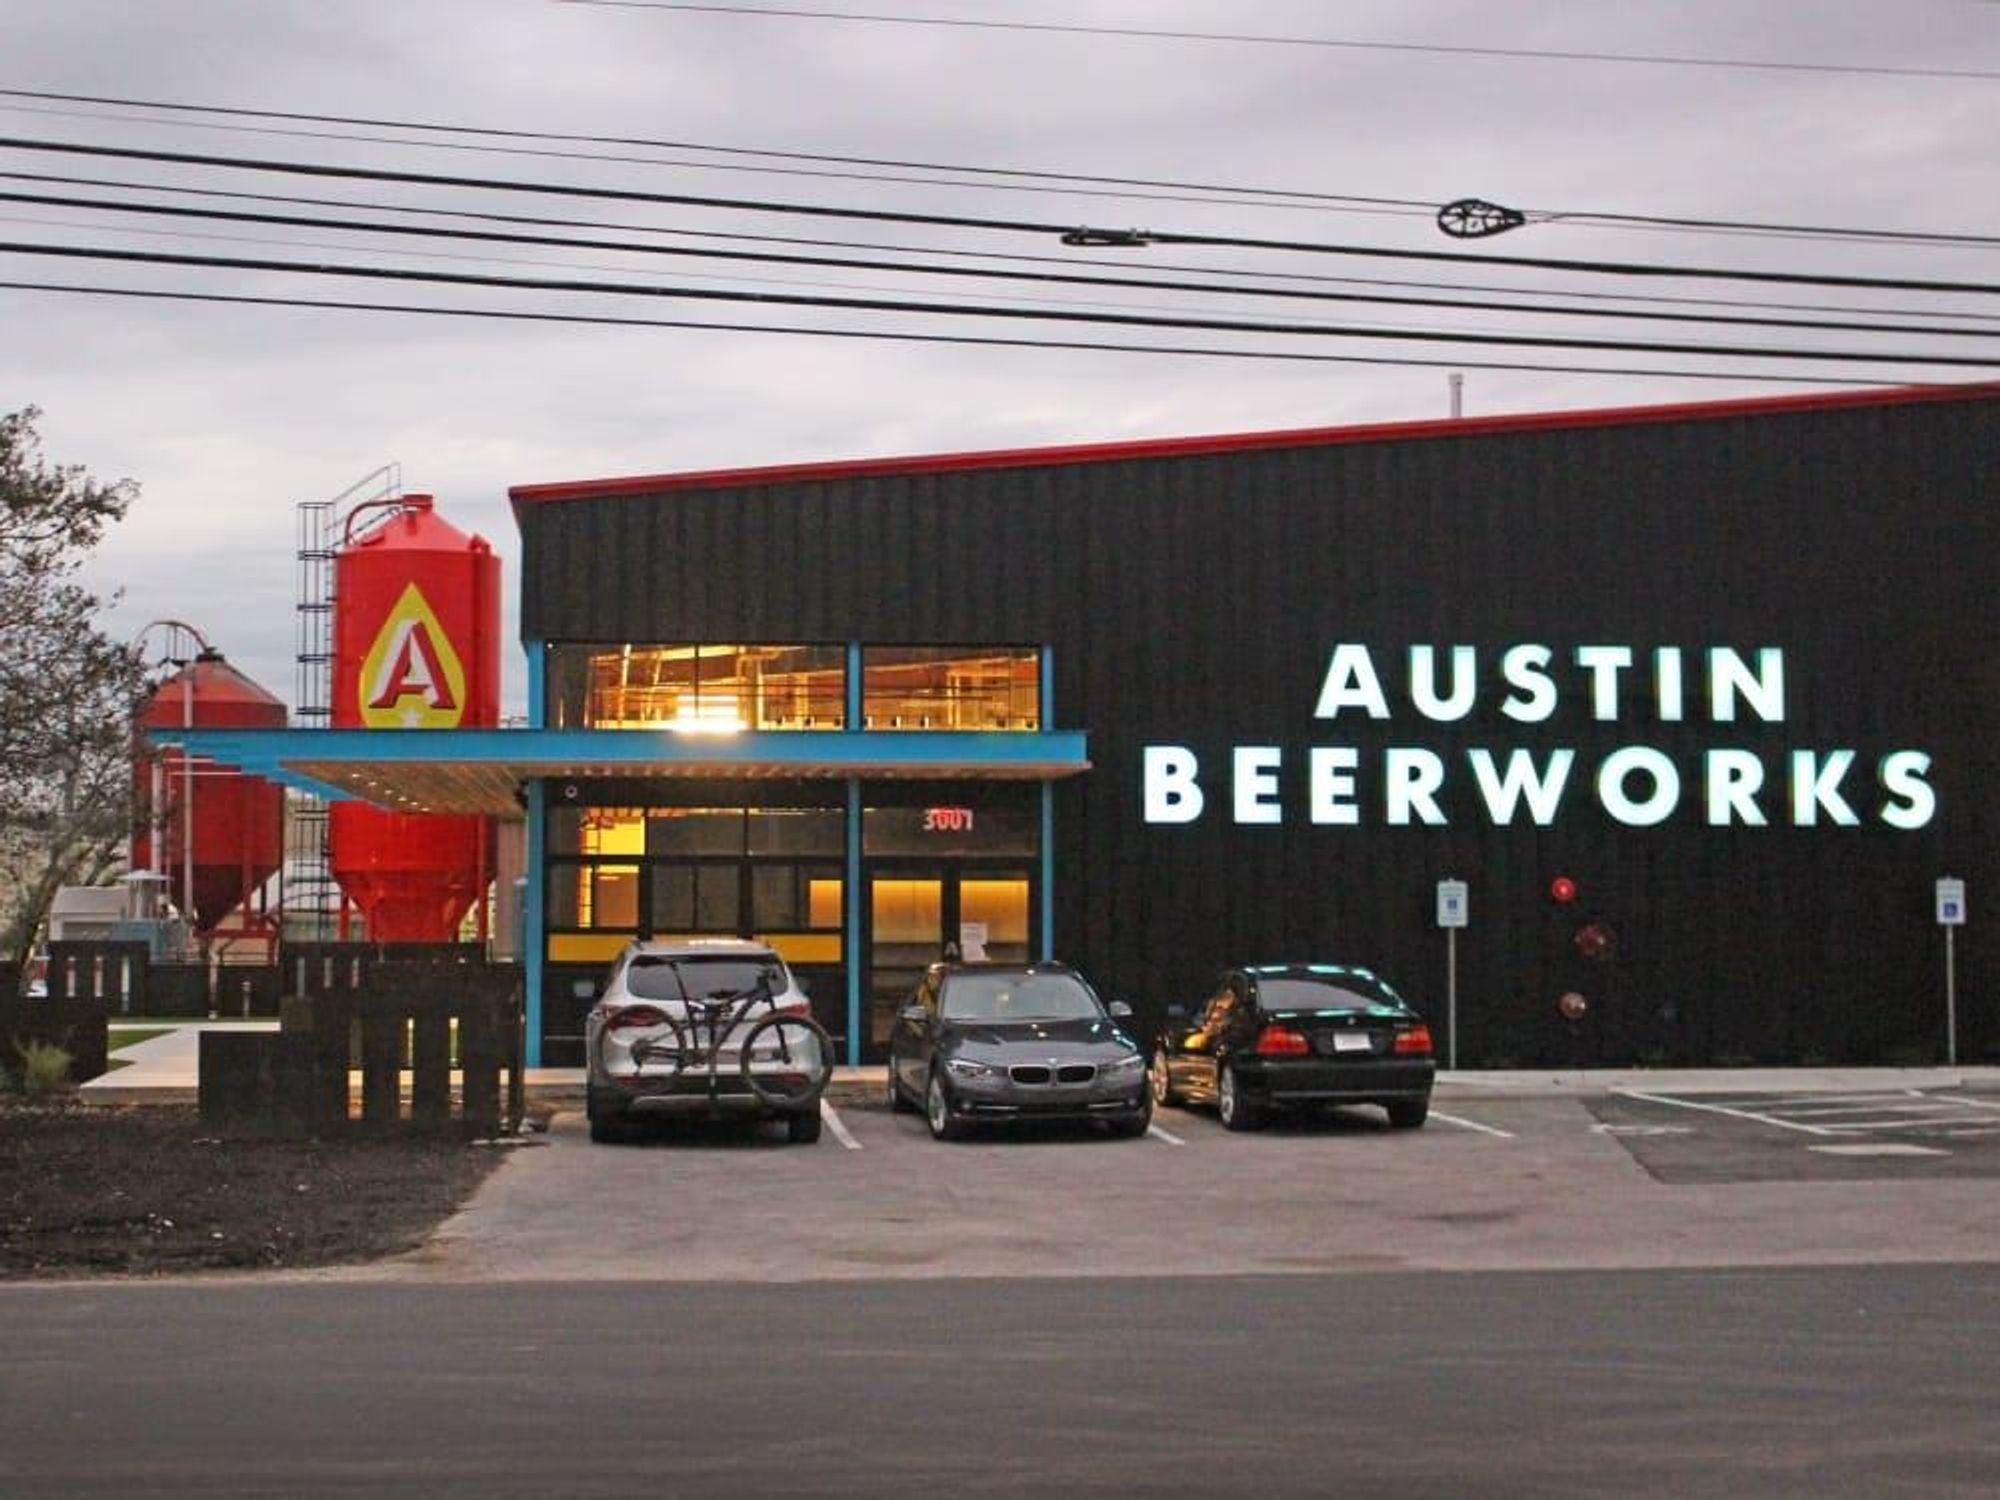 Austin Beerworks brewery front sign